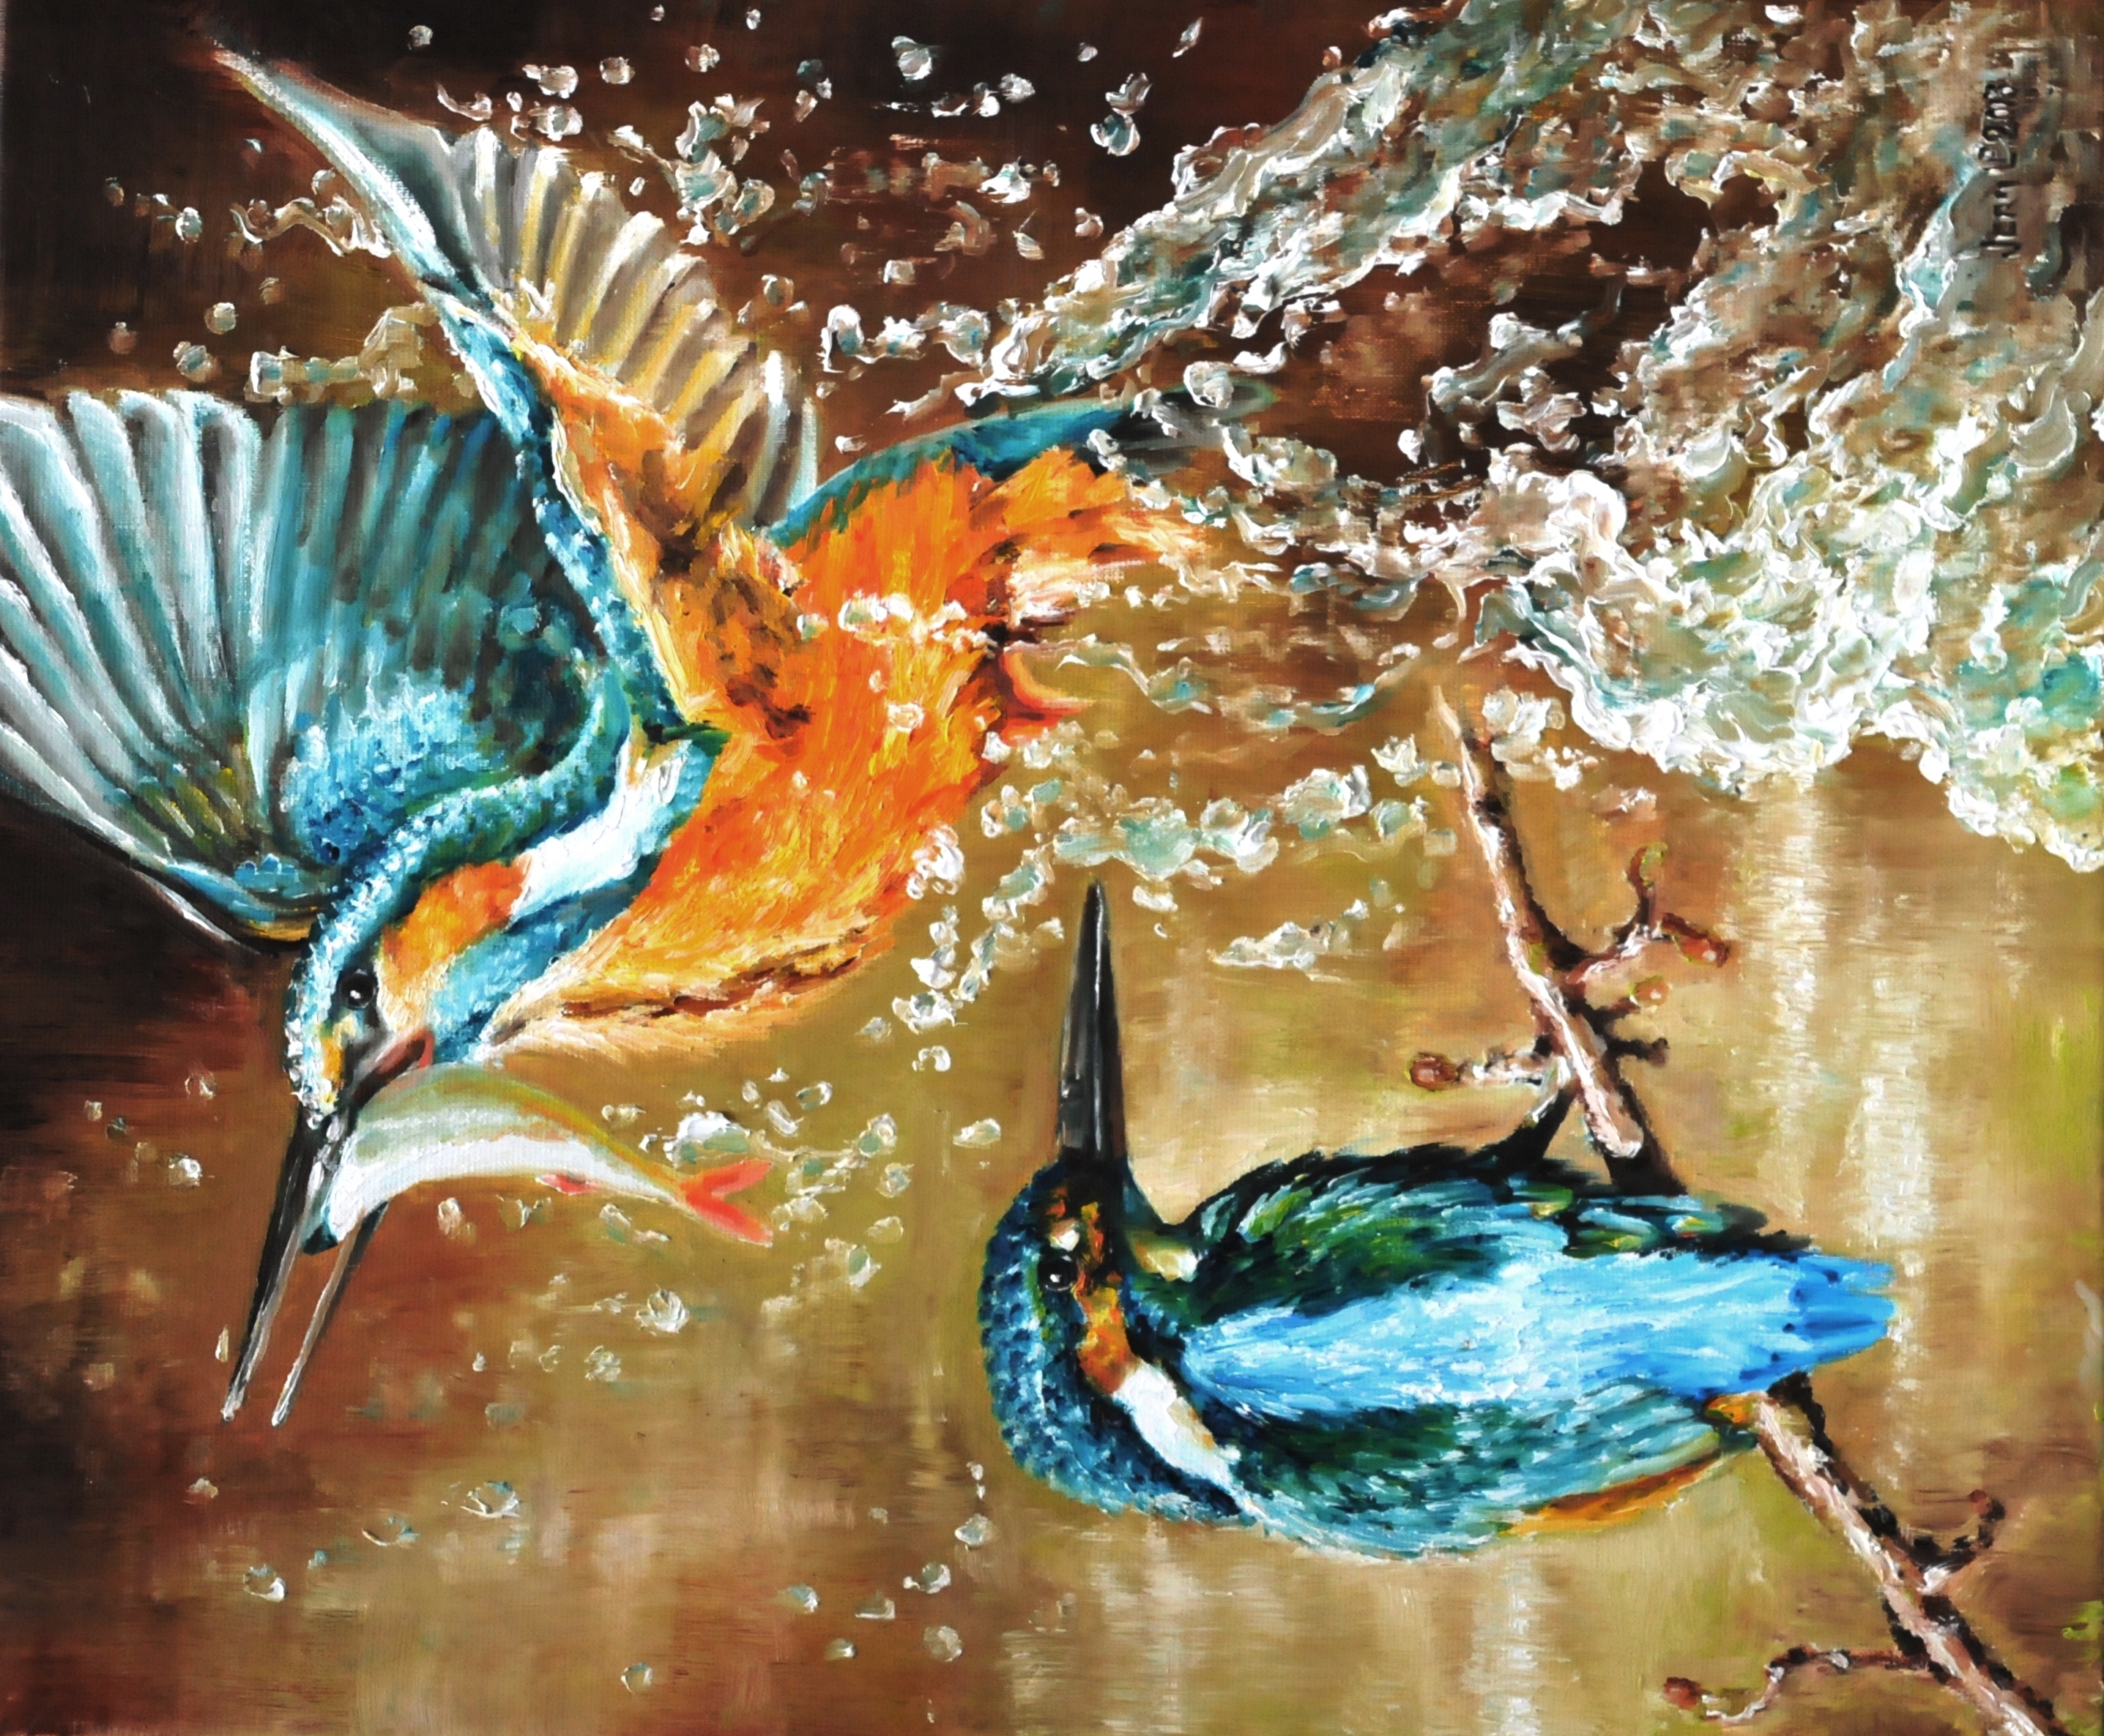 Kingfishers | Oil paint on linen | Year: 2012 | Dimensions: 70x60cm